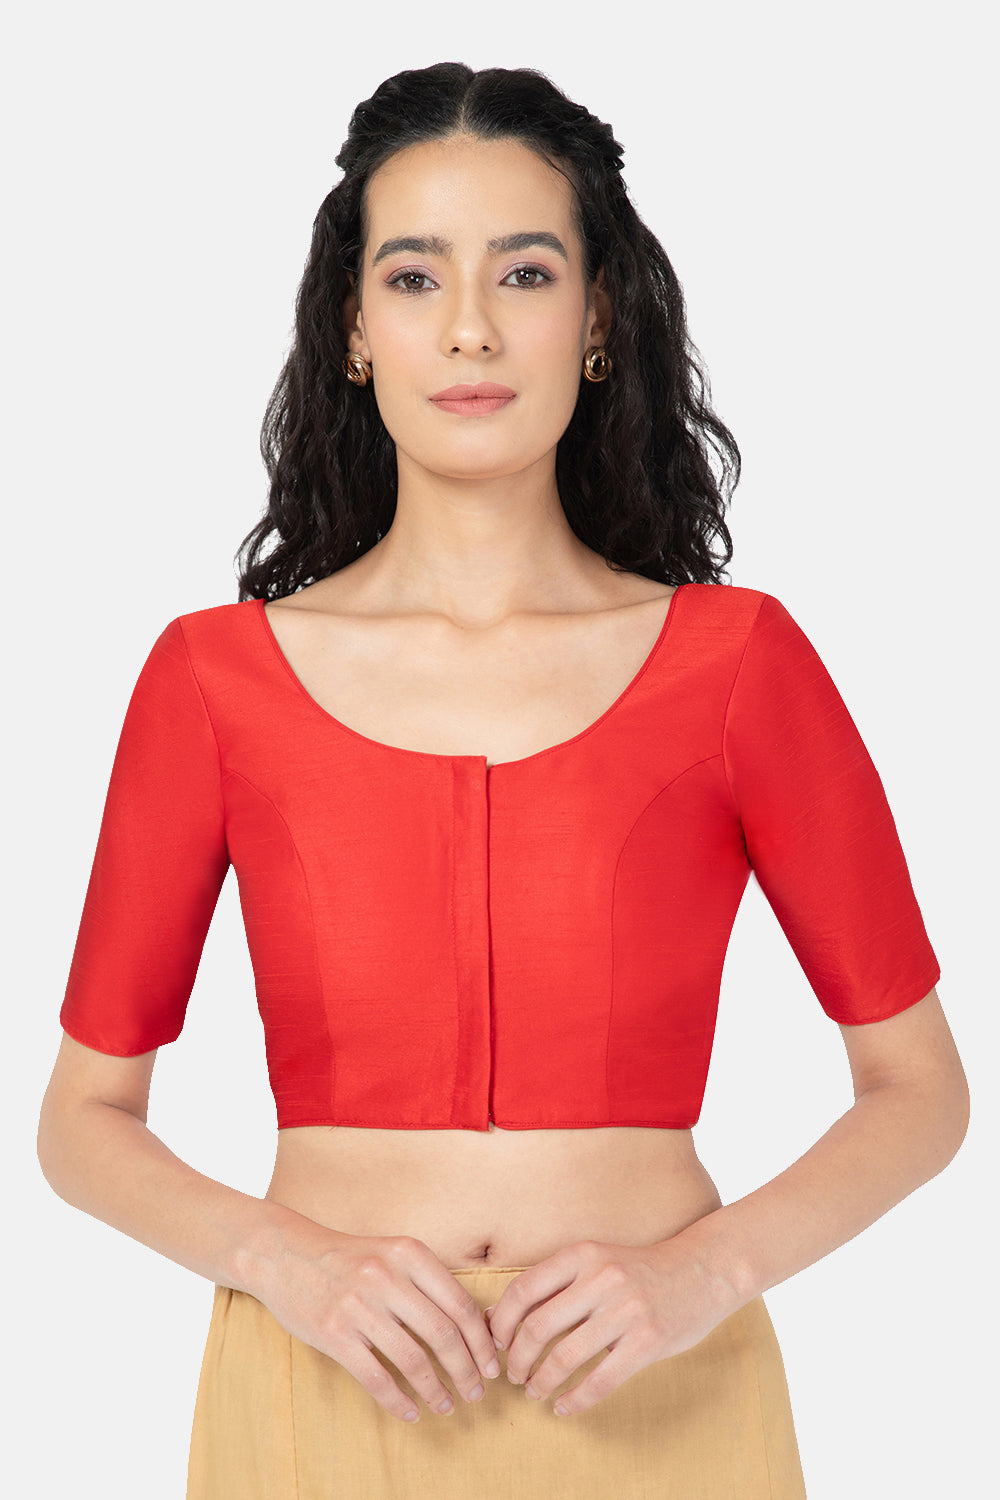 Naidu Hall Ethnic Raw Silk Saree Blouse with Round Neck Elbow Sleeves - Red